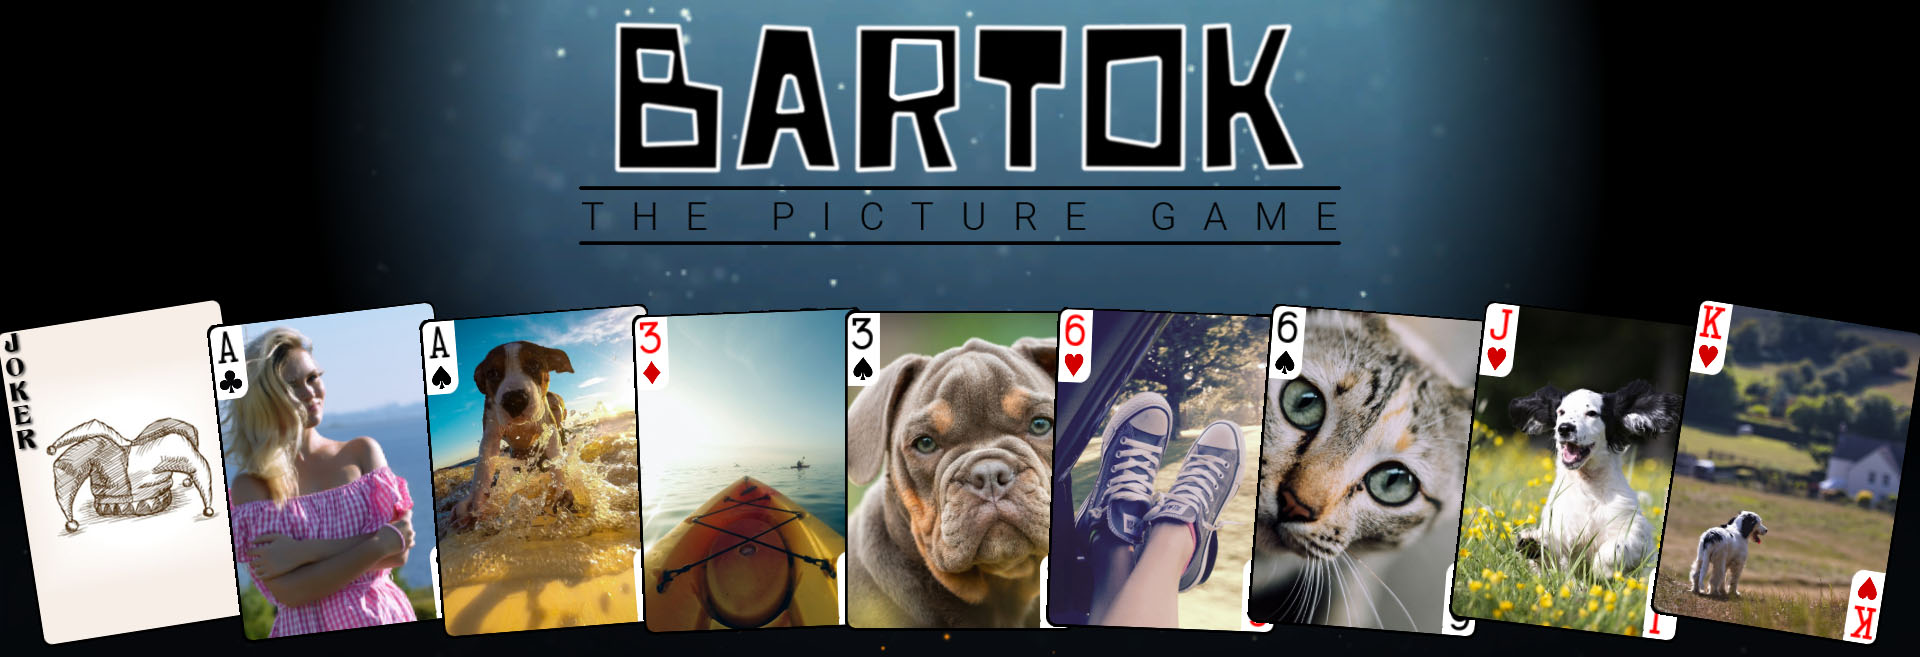 Bartok The Picture Game Free